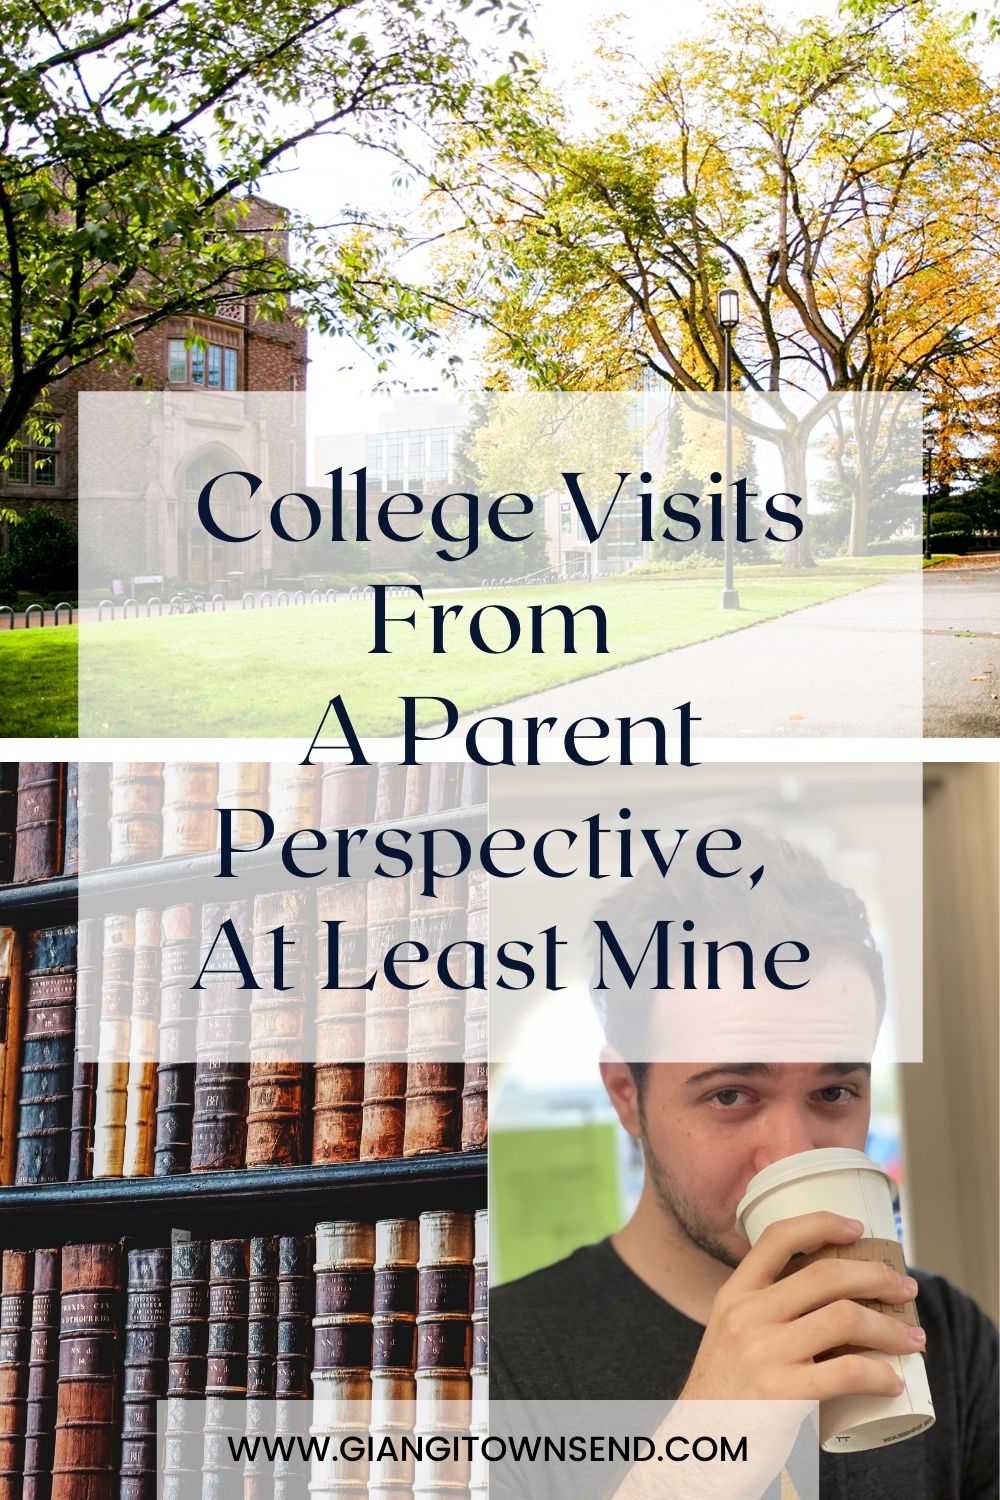 College Visits From A Parent Perspective, At Least Mine.